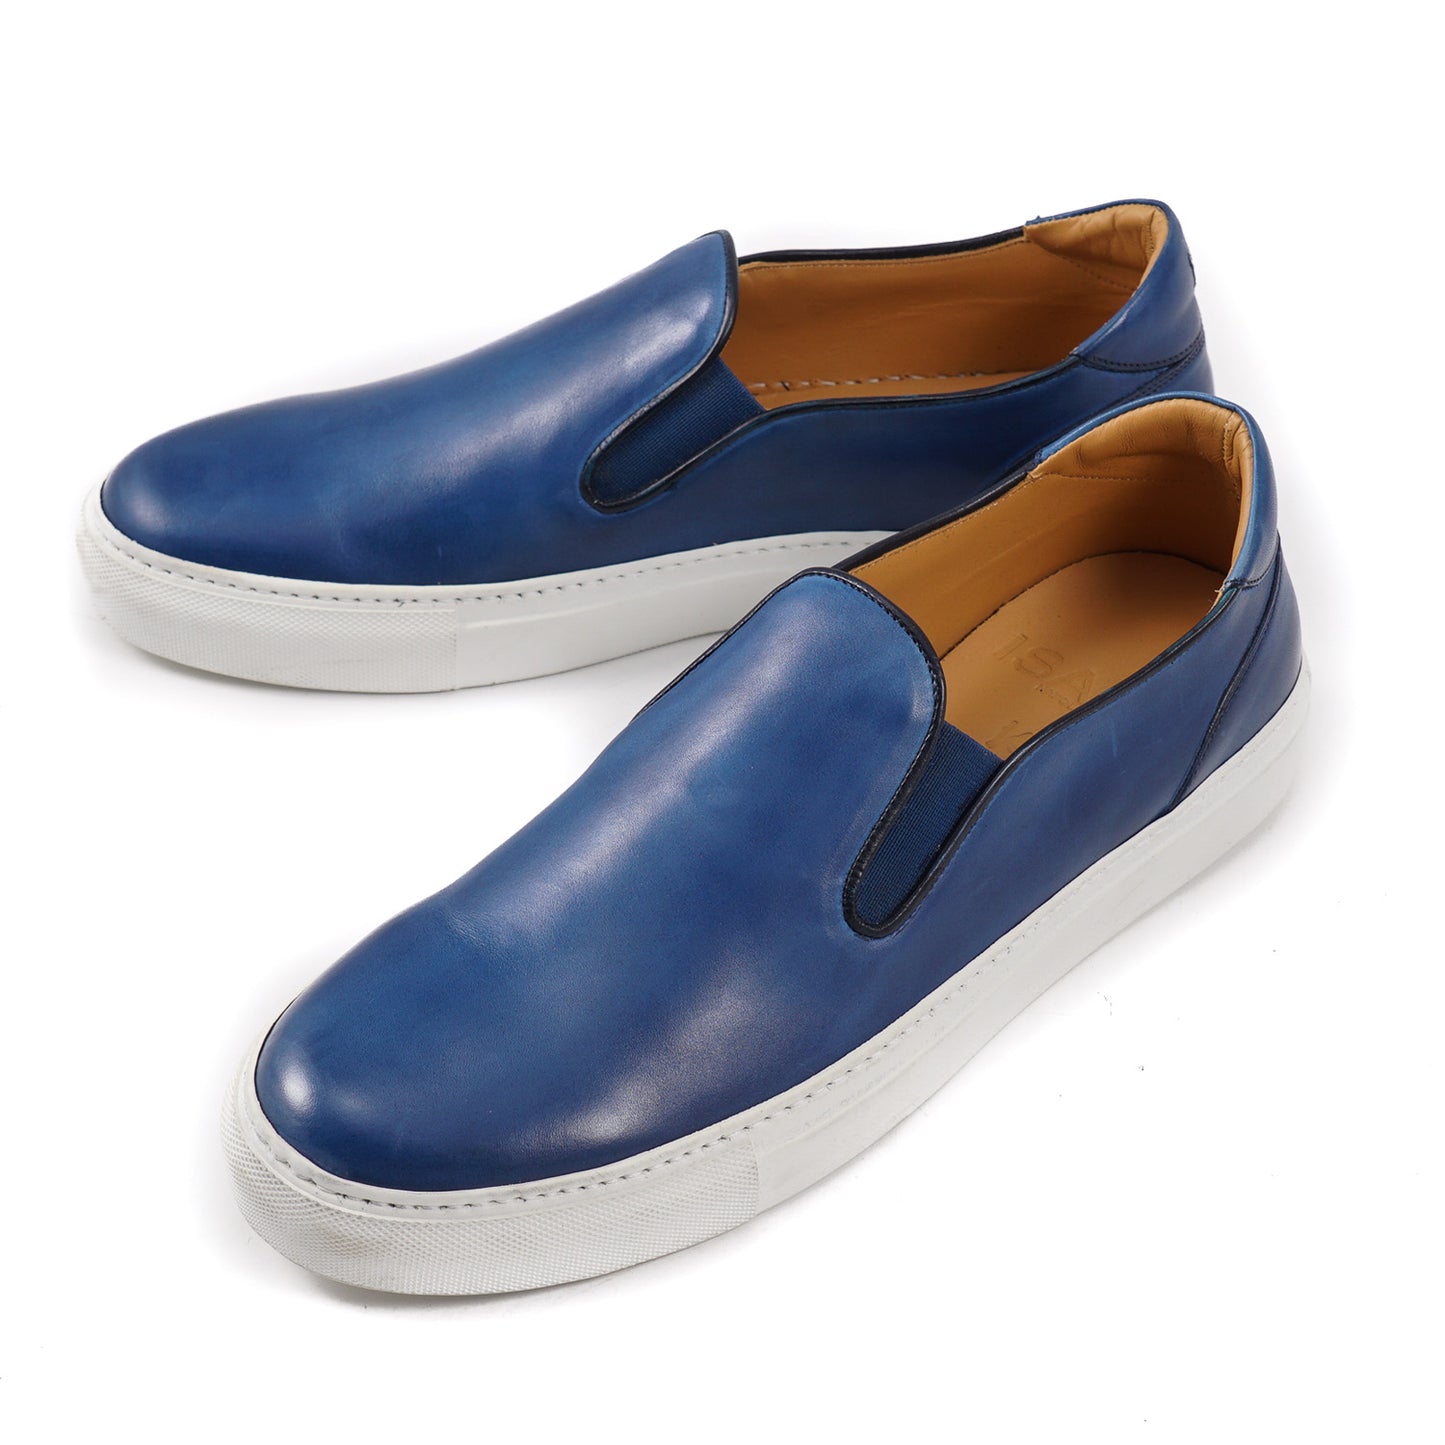 Isaia Slip-On Calf Leather Sneakers - Top Shelf Apparel